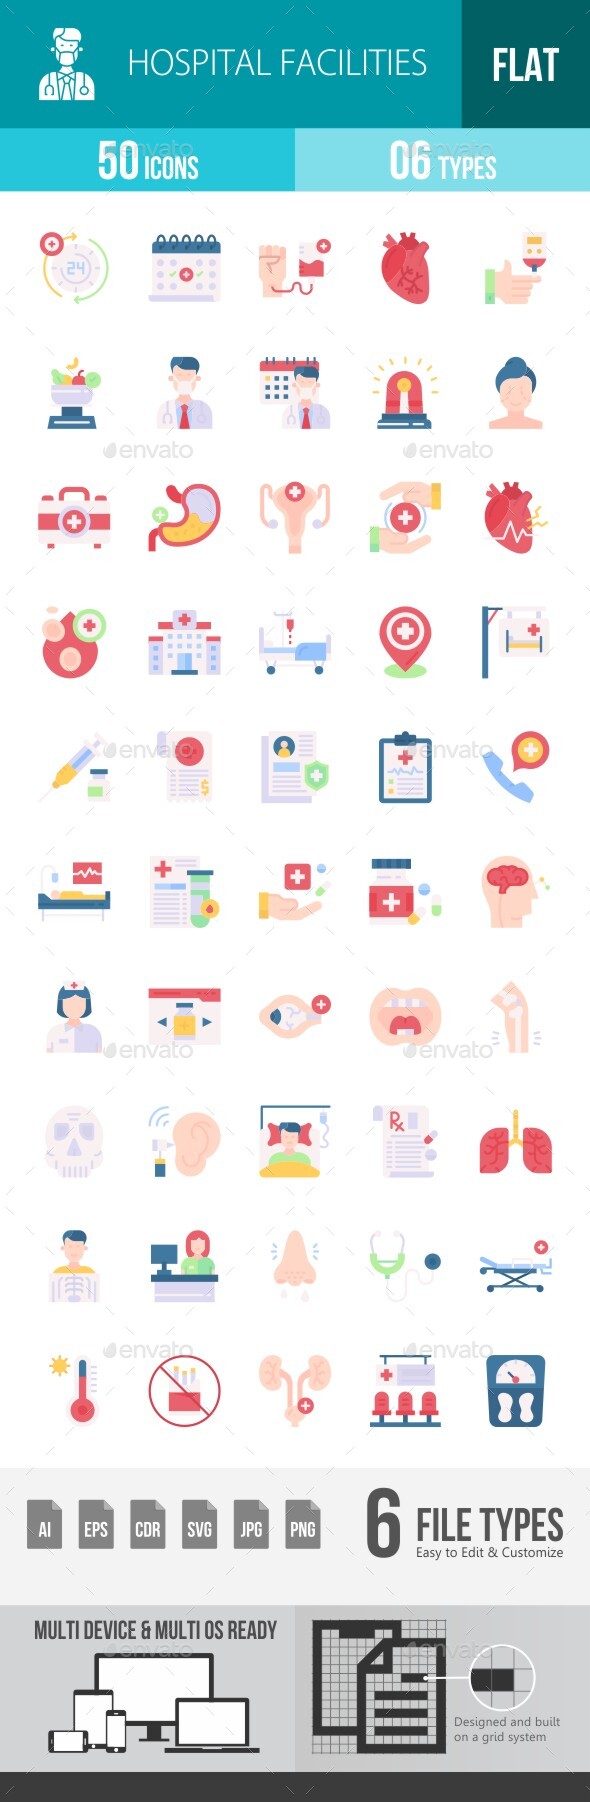 [DOWNLOAD]Hospital Facilities Flat Multicolor Icons